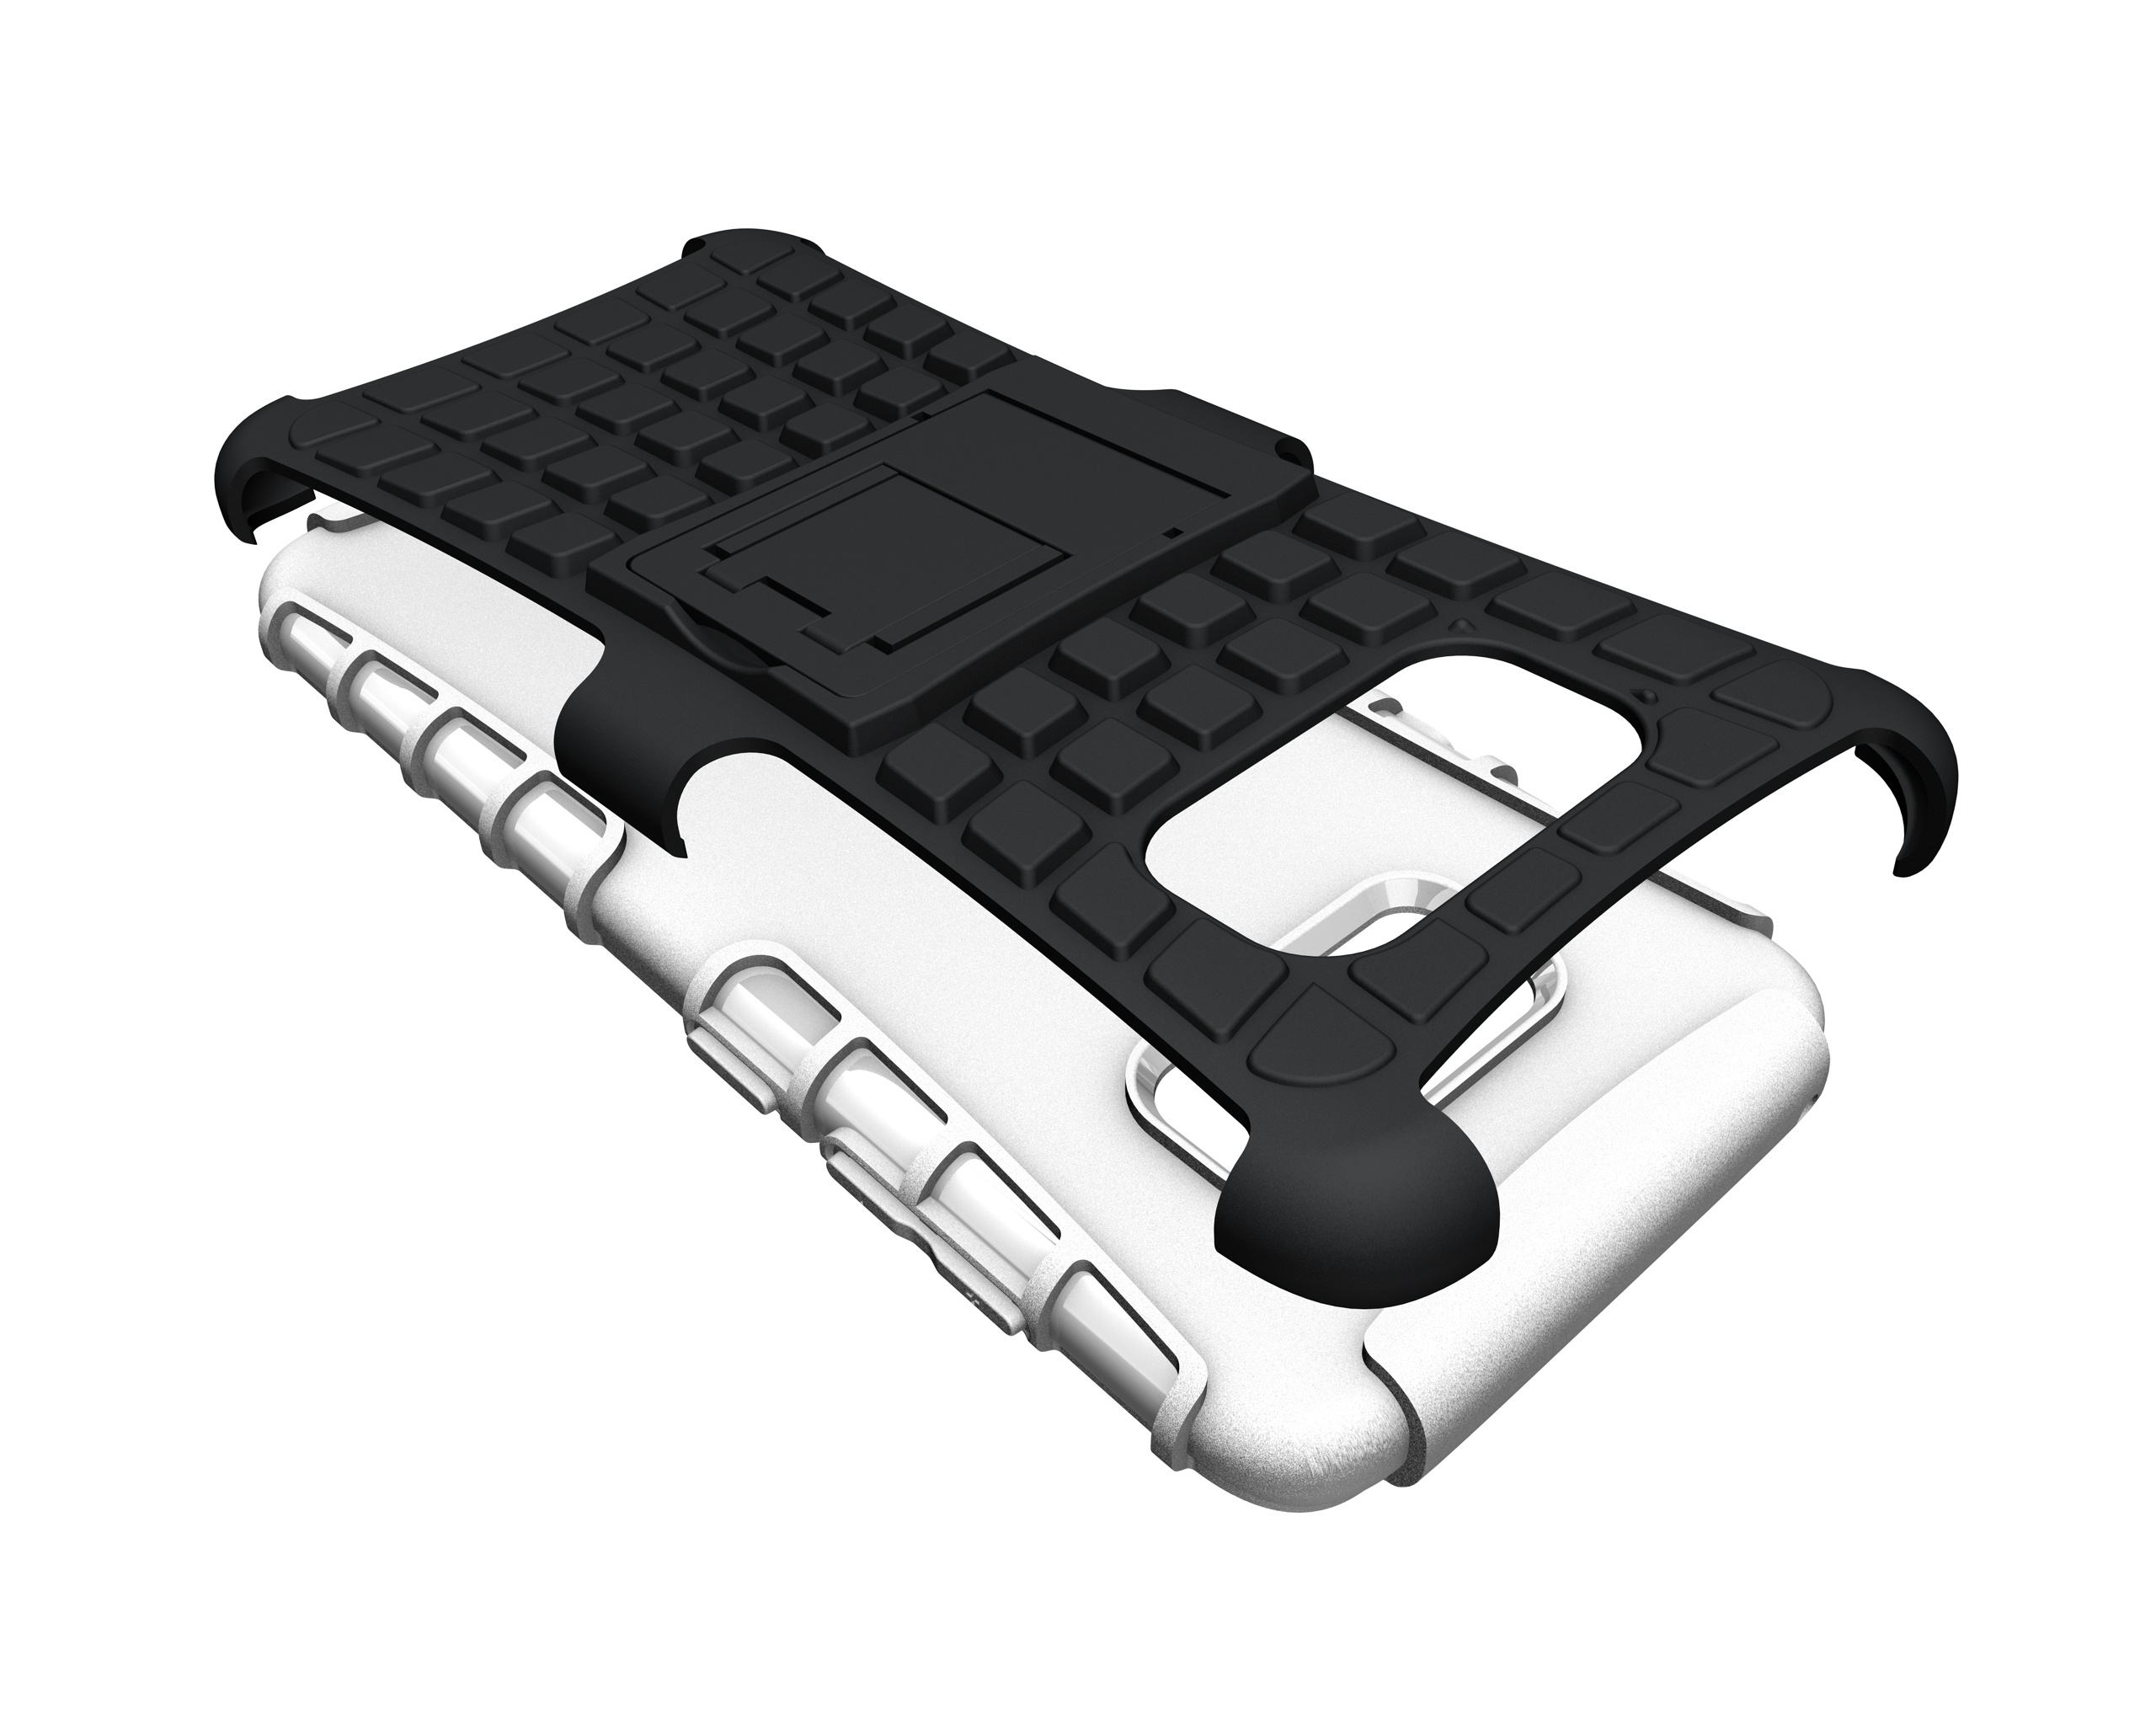 Bakeeytrade-2-in-1-Armor-Kickstand-TPU-PC-Case-for-Samsung-Galaxy-S8-Plus-1238929-6